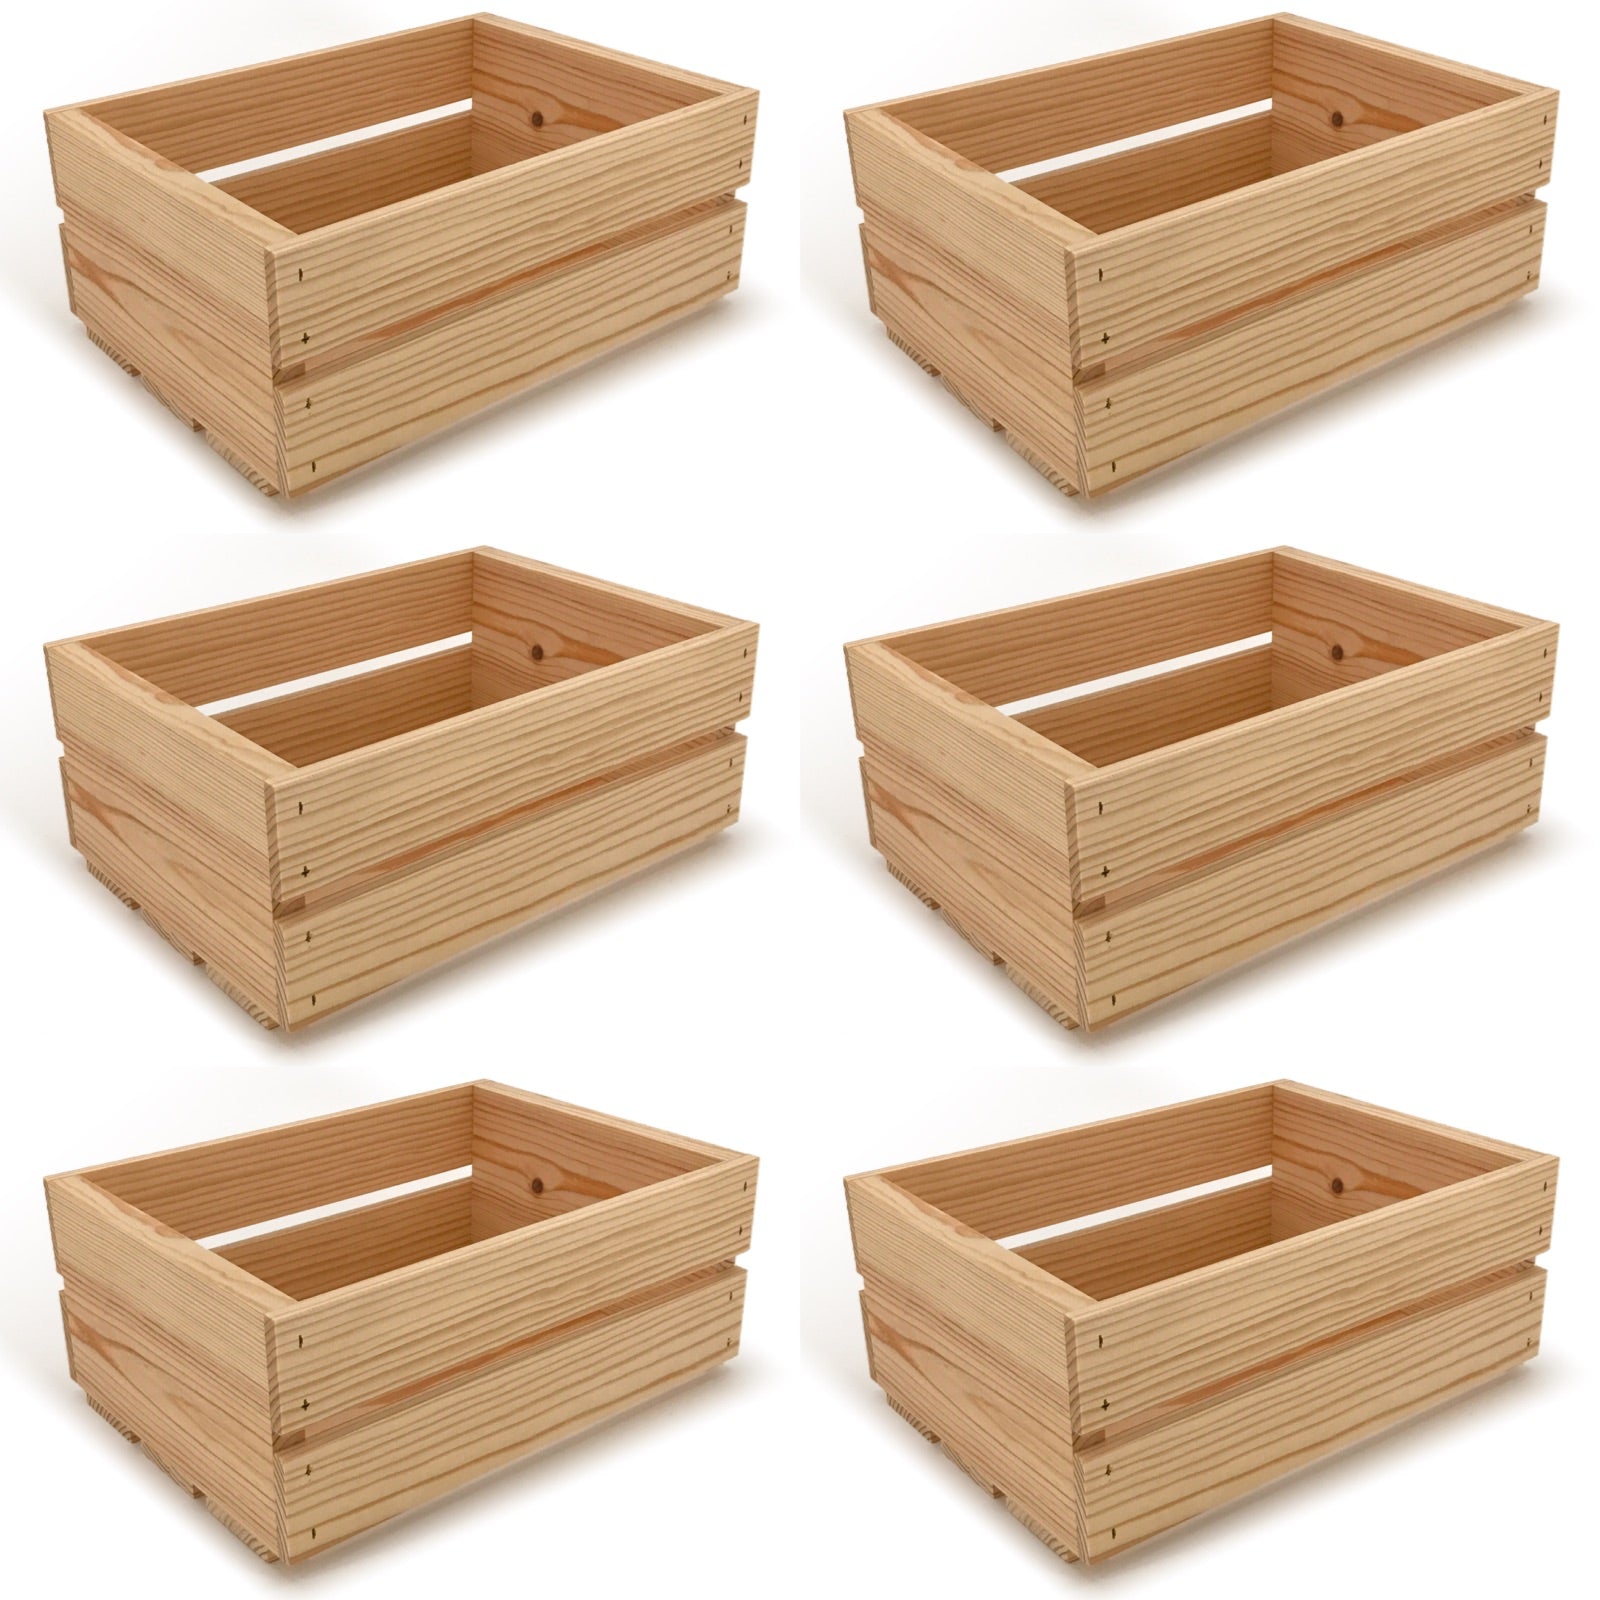 6 Small wooden crates 12x9x5.25